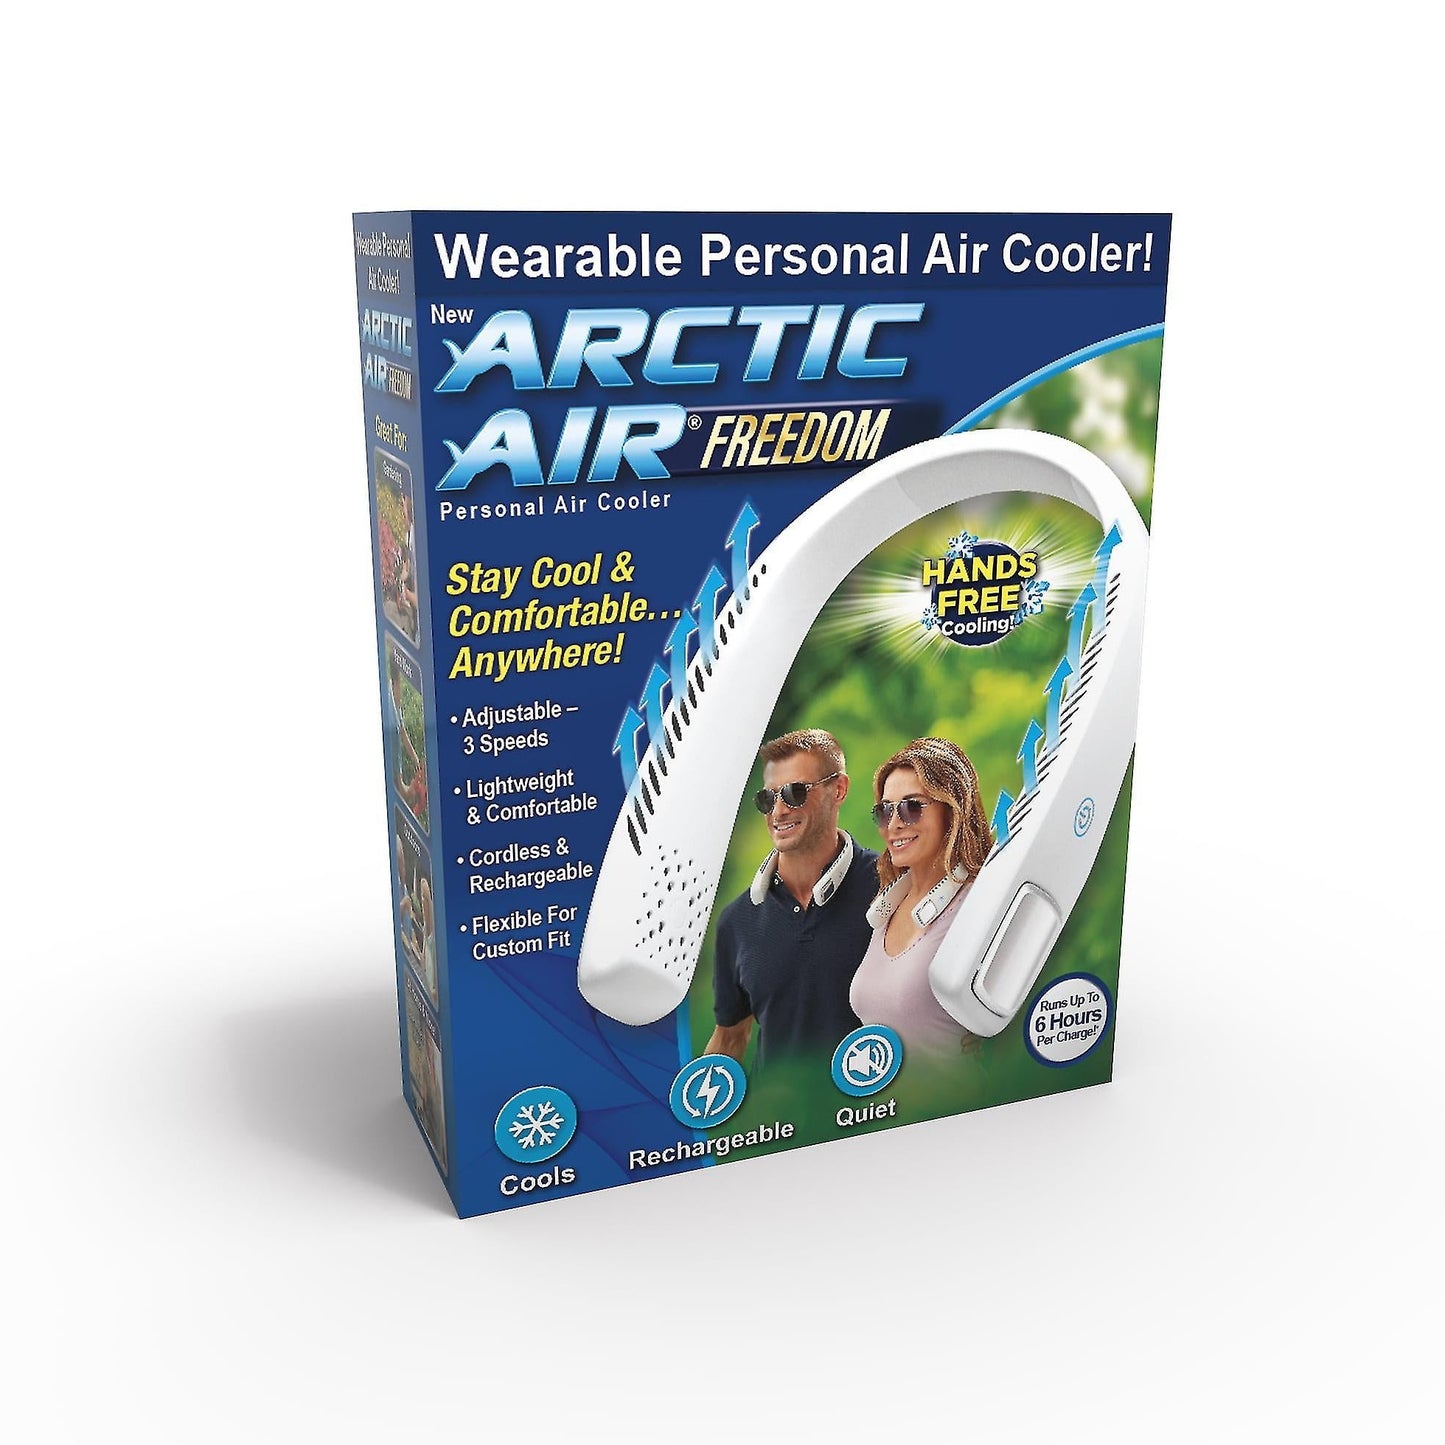 Personal Air Cooler - Portable 3-Speed Neck Fan